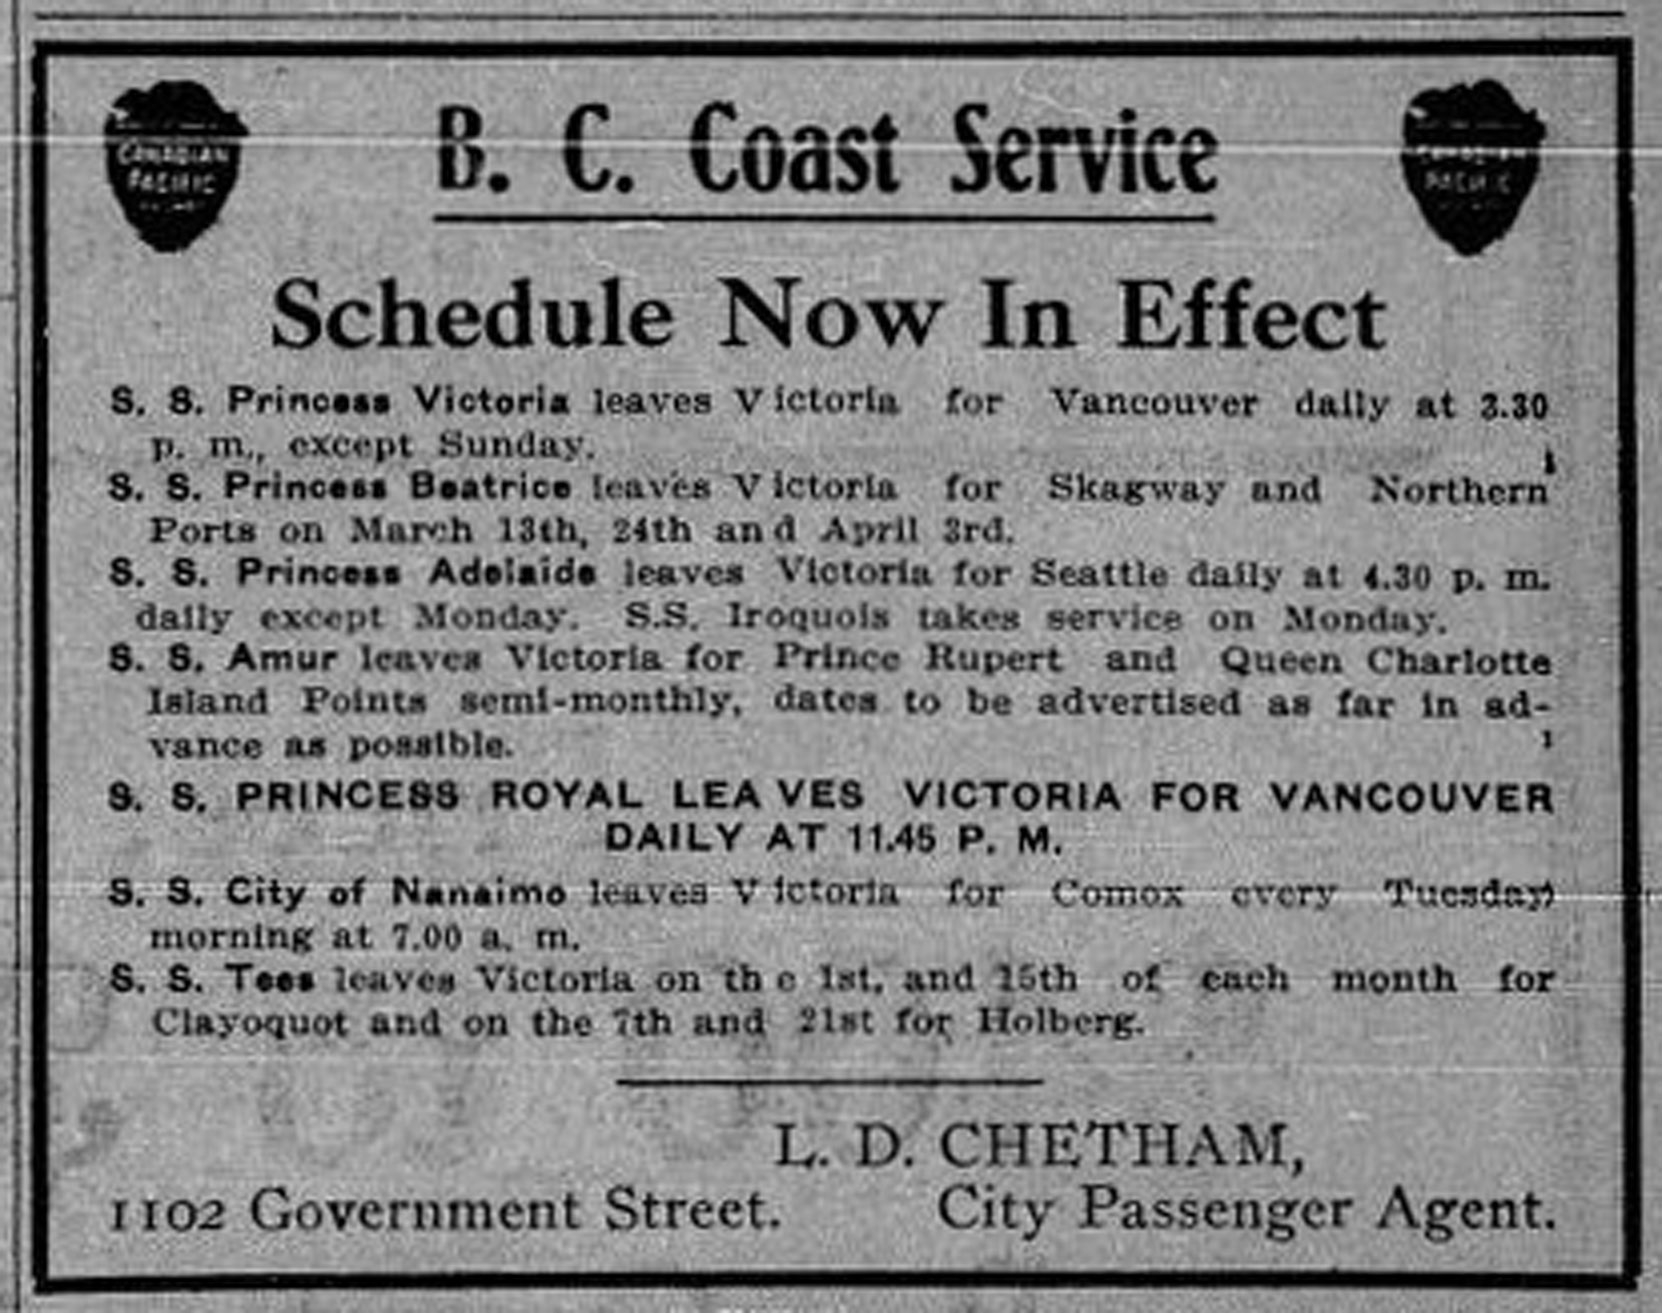 B.C. Coast Service schedule, 1911. Ticket office, 1102 Government Street. (Victoria Online Sightseeing Tours collection)